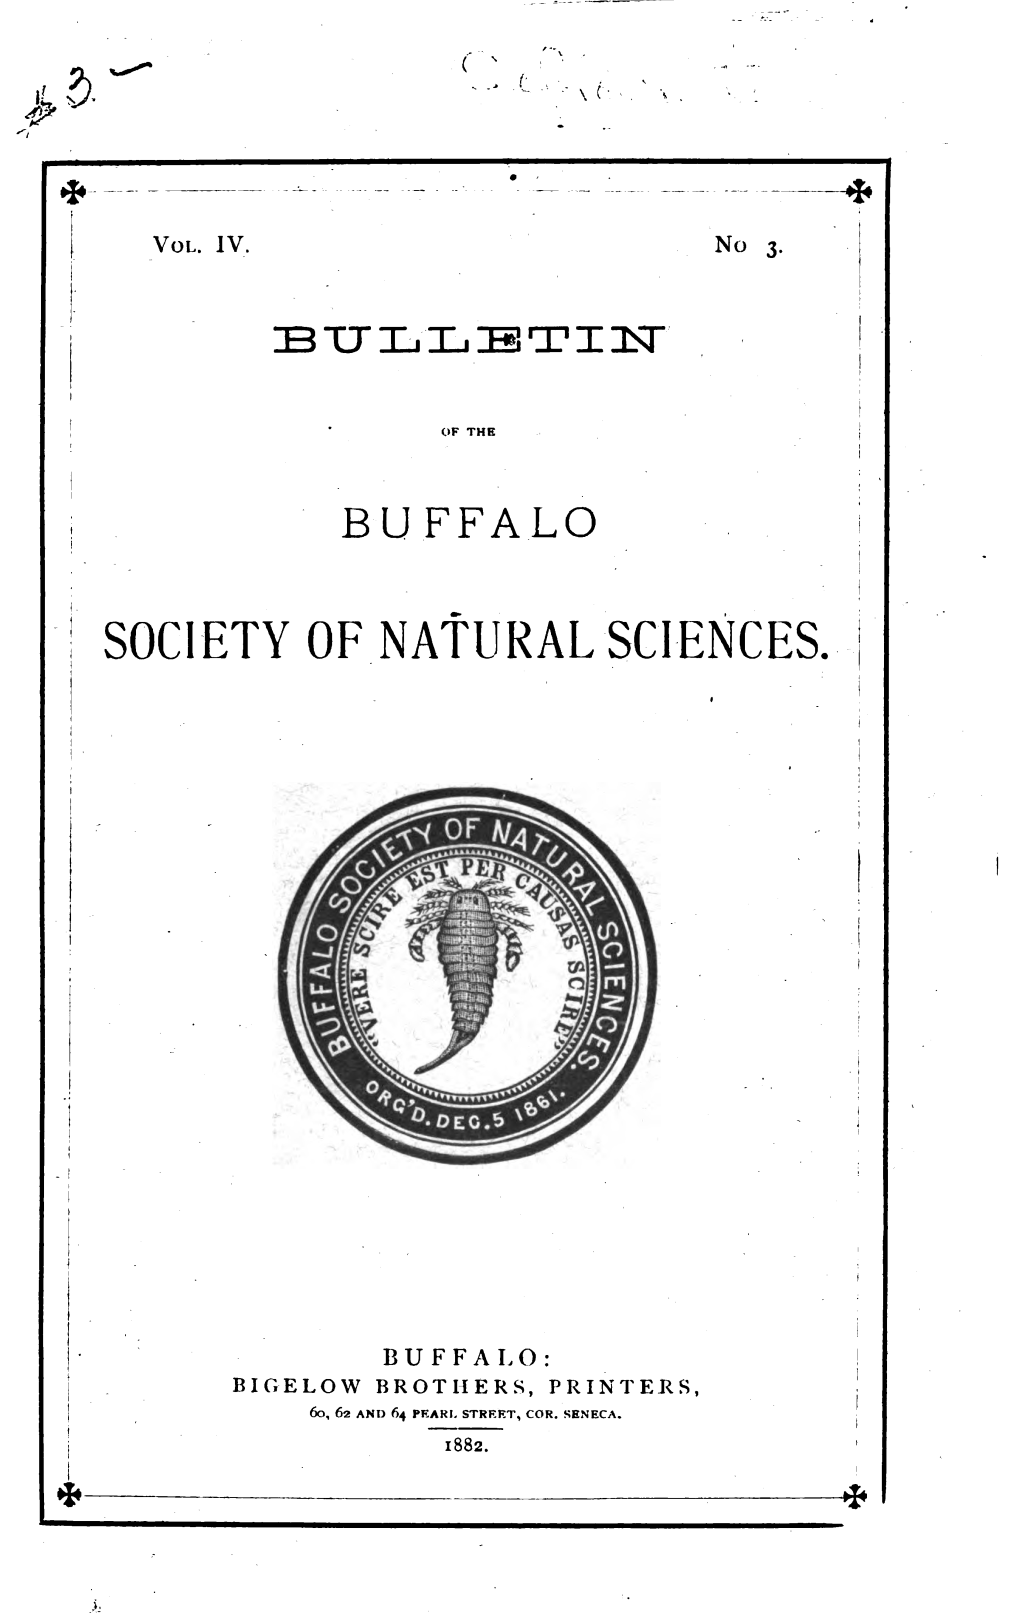 The Plants of Buffalo and Its Vicinity